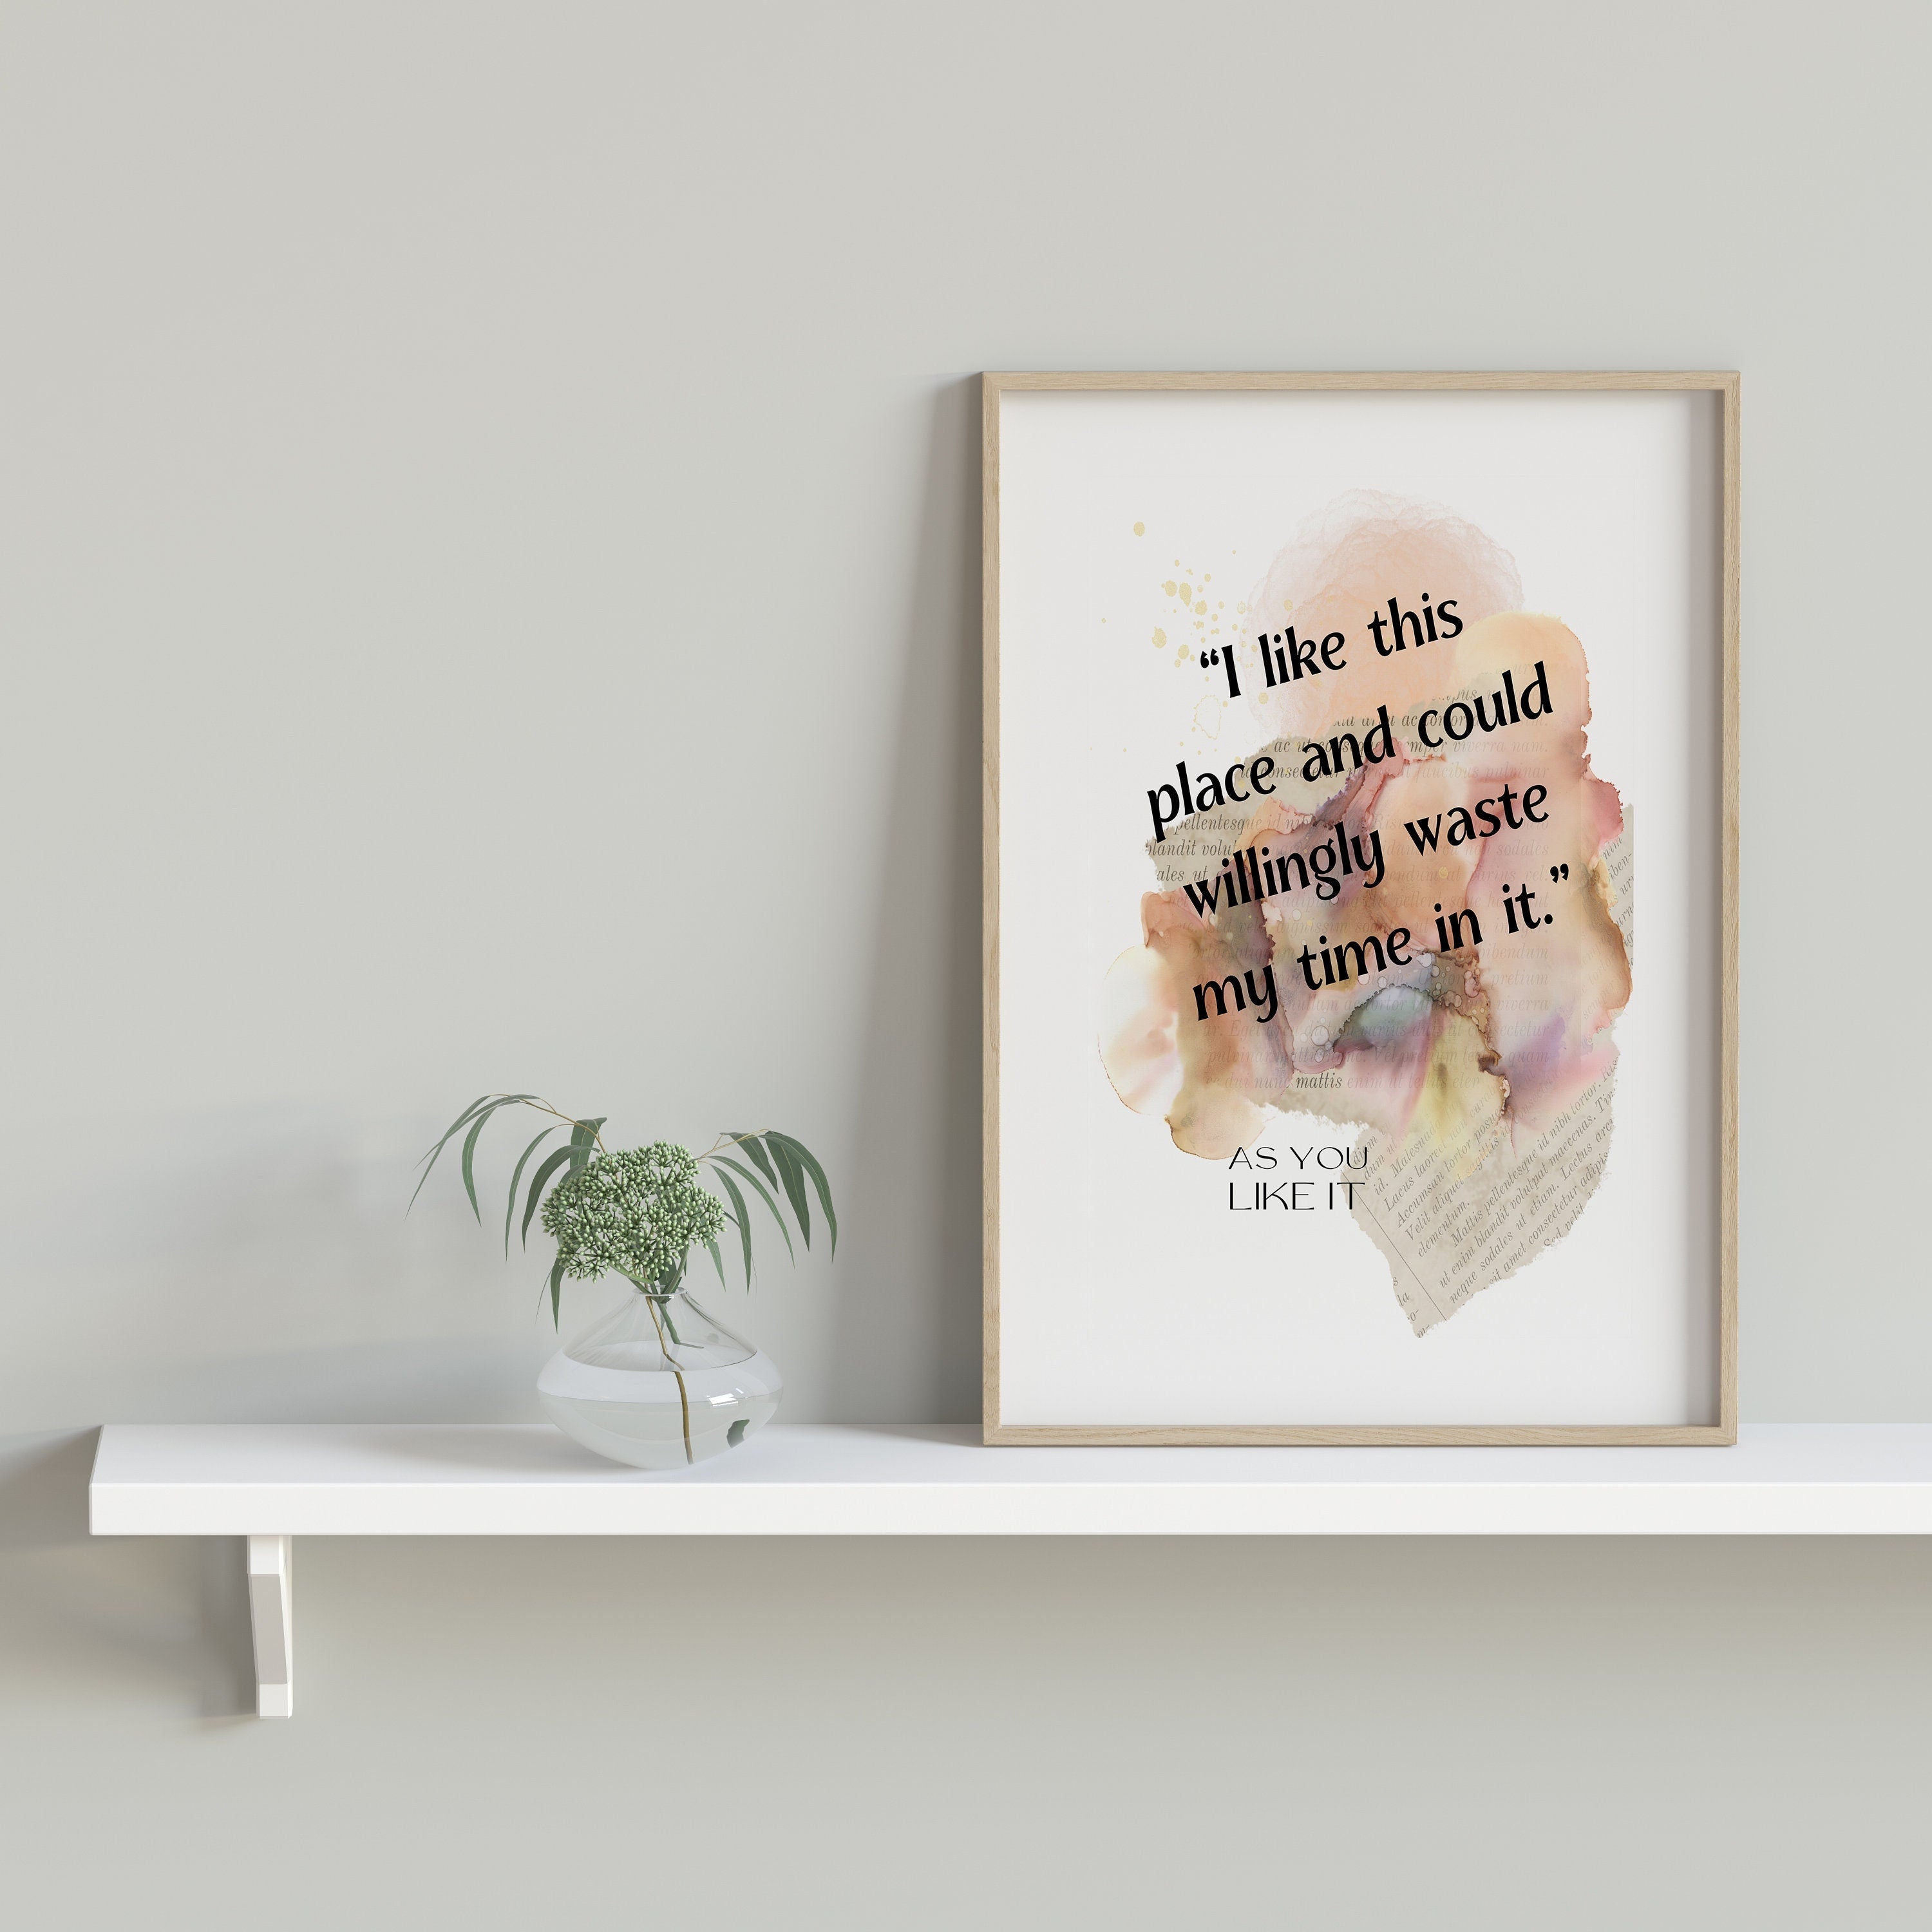 William Shakespeare Quote Print I Like This Place, As You Like It Inspirational Quote Wall Art Prints Framed or Unframed